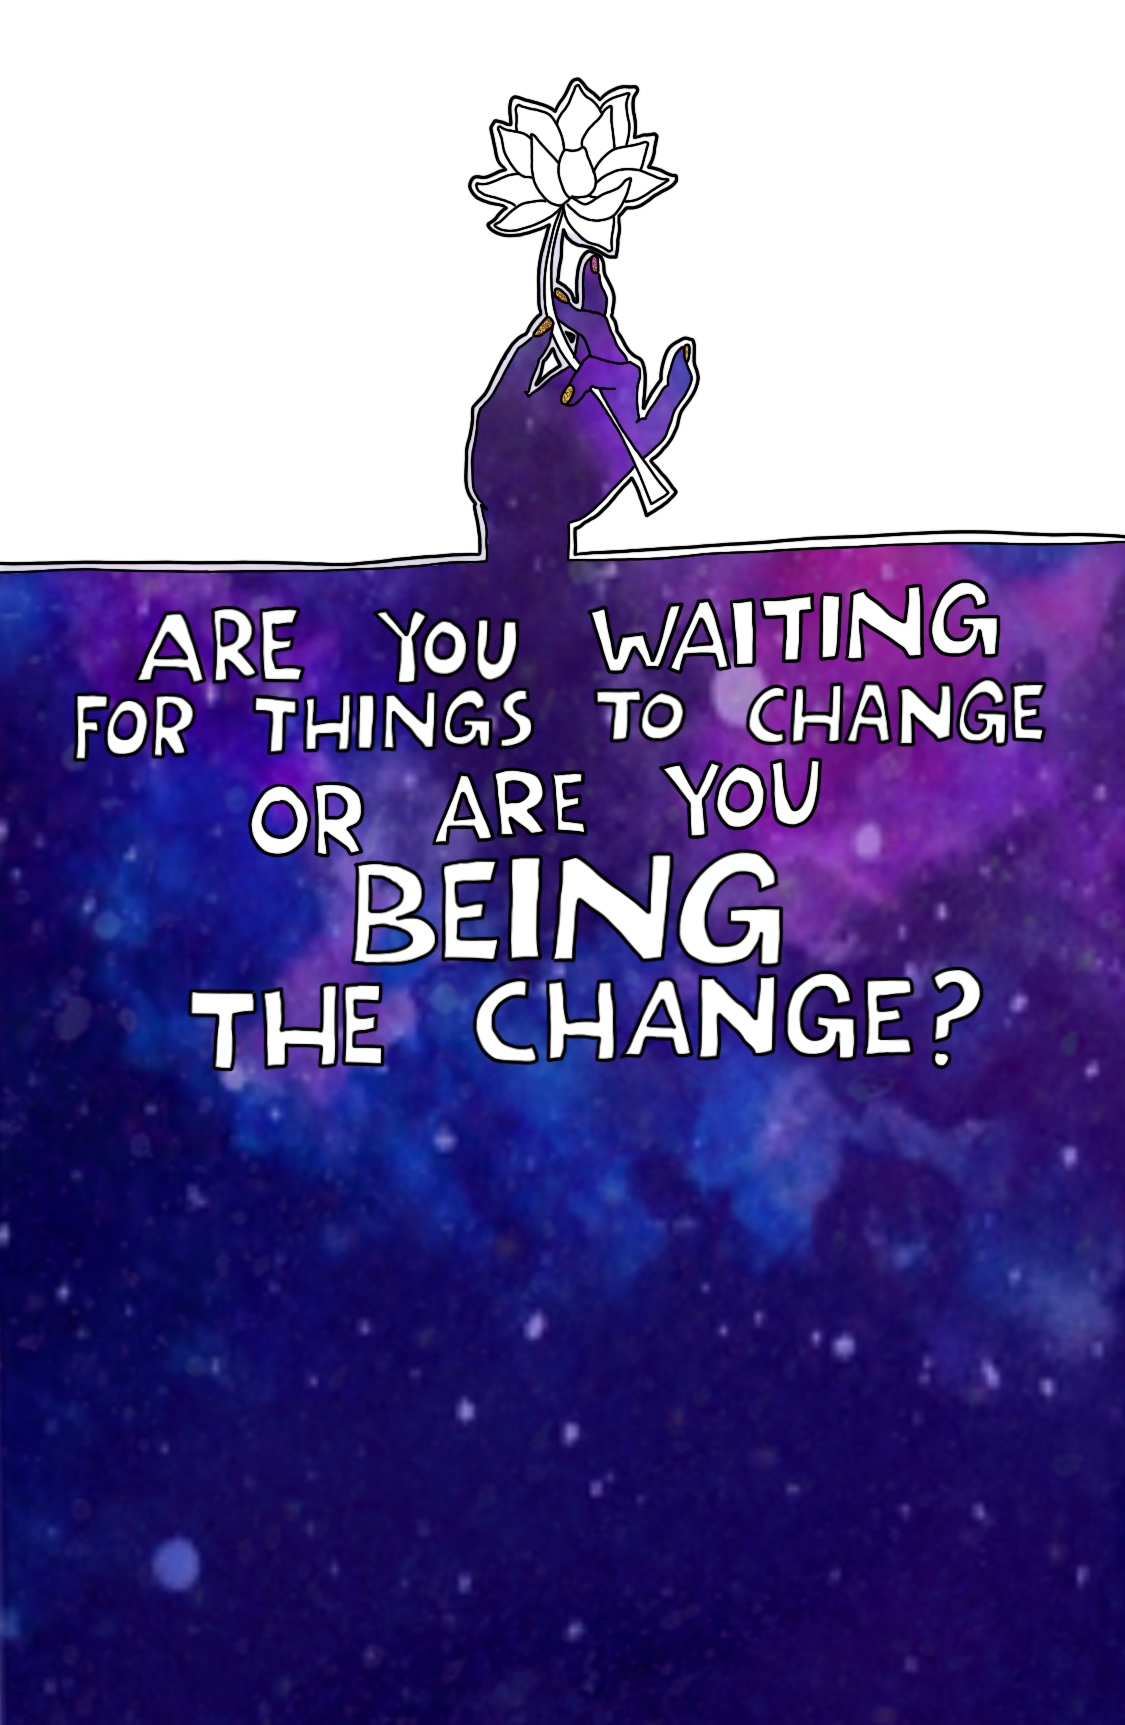 Journal prompt: Are you waiting for things to change or are you being the change?